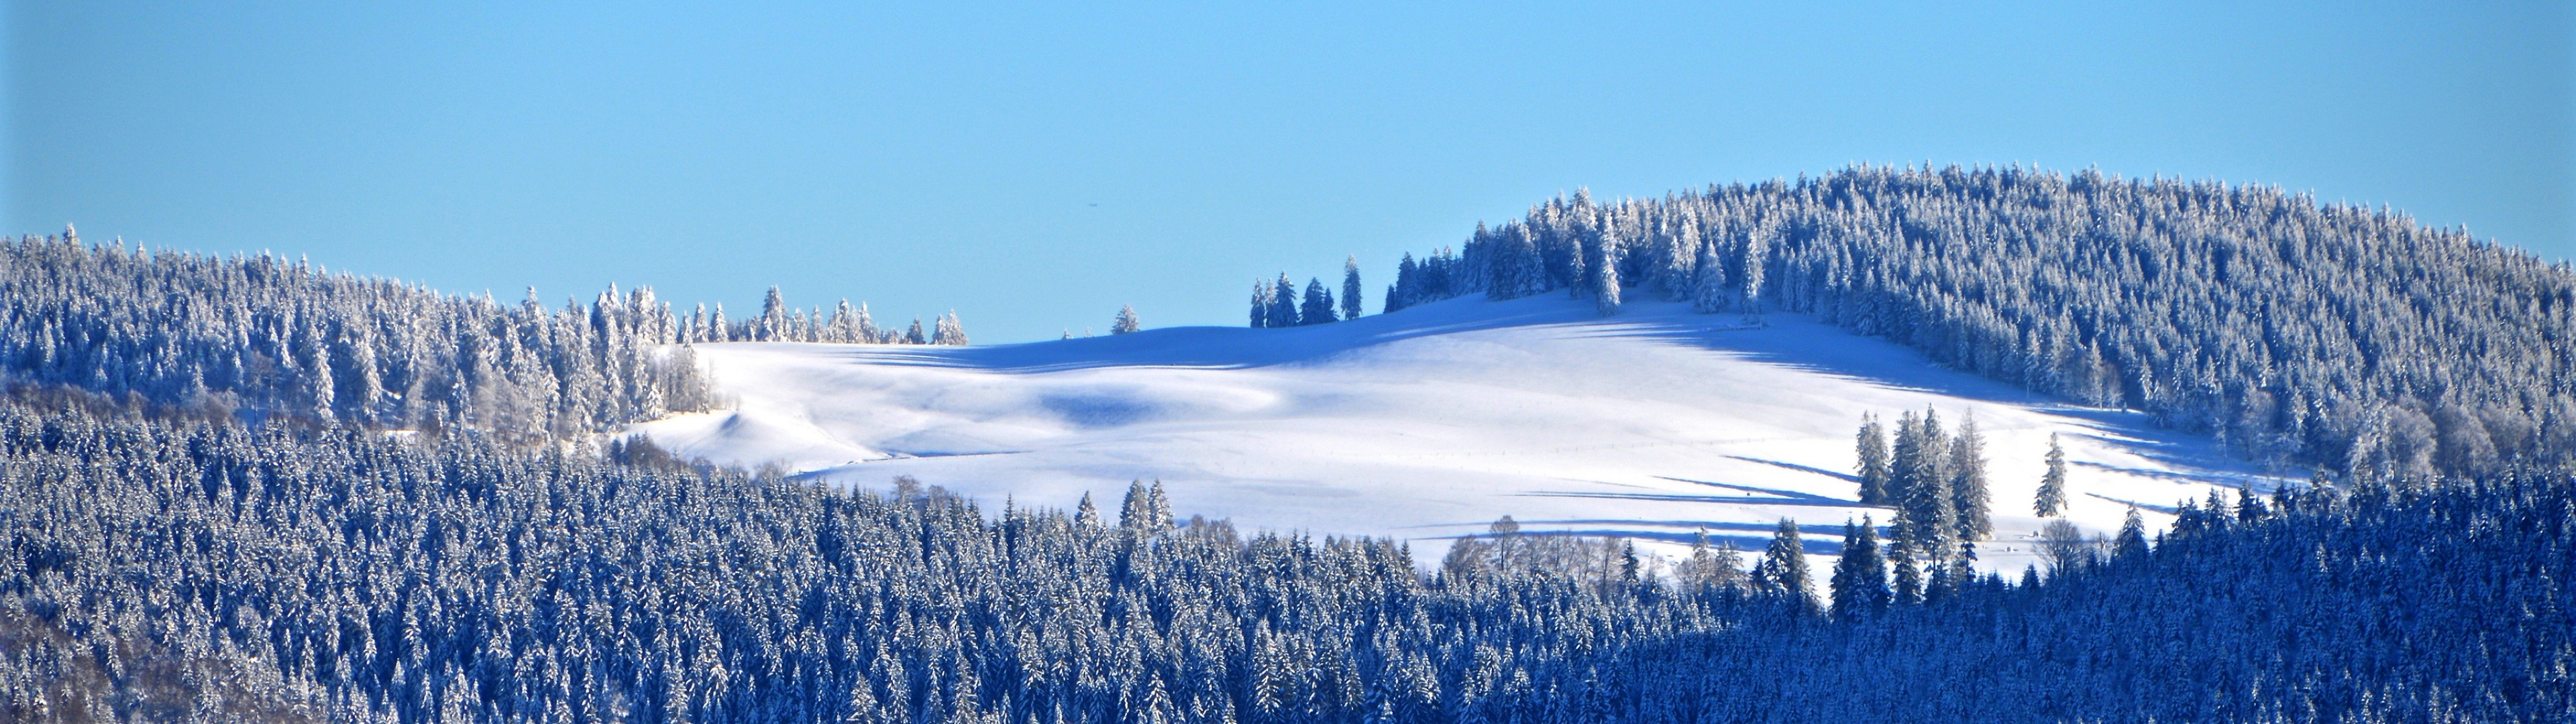 Winter forest Wallpaper 4K, Snow, Trees, Hill, Sky view, Clear sky, Blue Sky, Nature